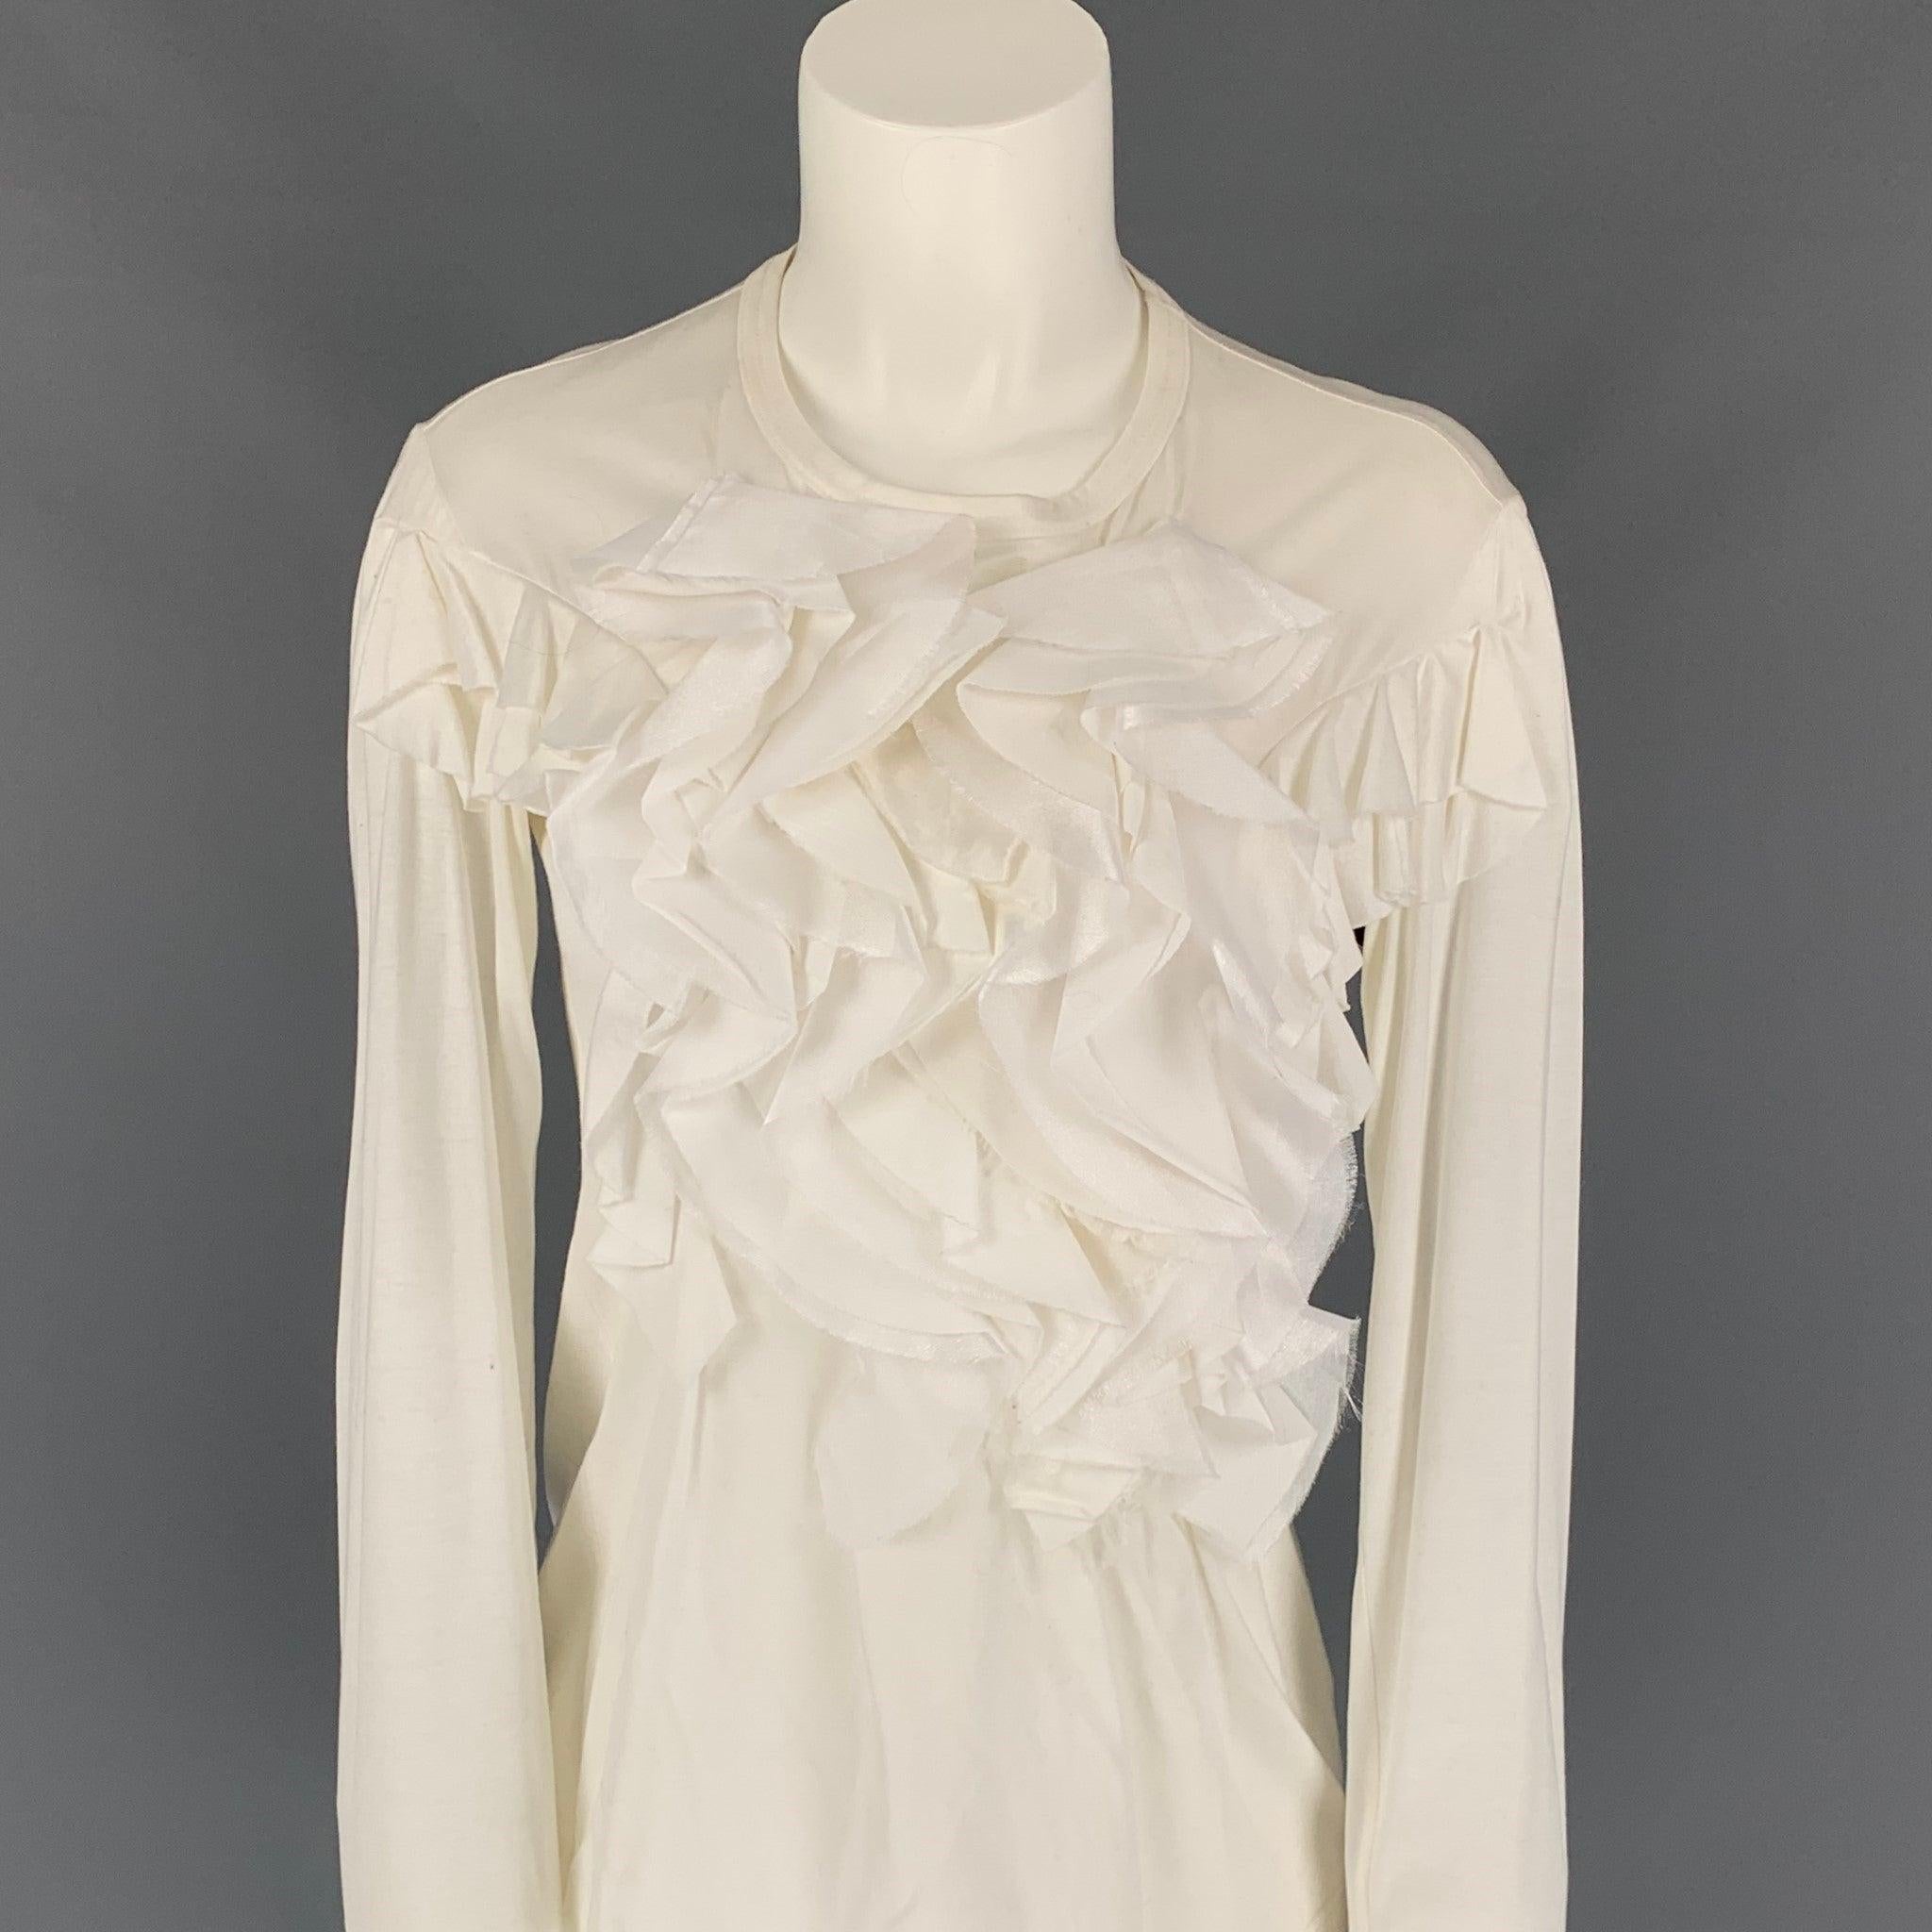 JUNYA WATANABE blouse comes in a white material with a front ruffled design featuring long sleeves and a crew-neck. Made in Japan.
Very Good
Pre-Owned Condition. 

Marked:   S 

Measurements: 
 
Shoulder: 16.5 inches  Bust: 32 inches  Sleeve: 25